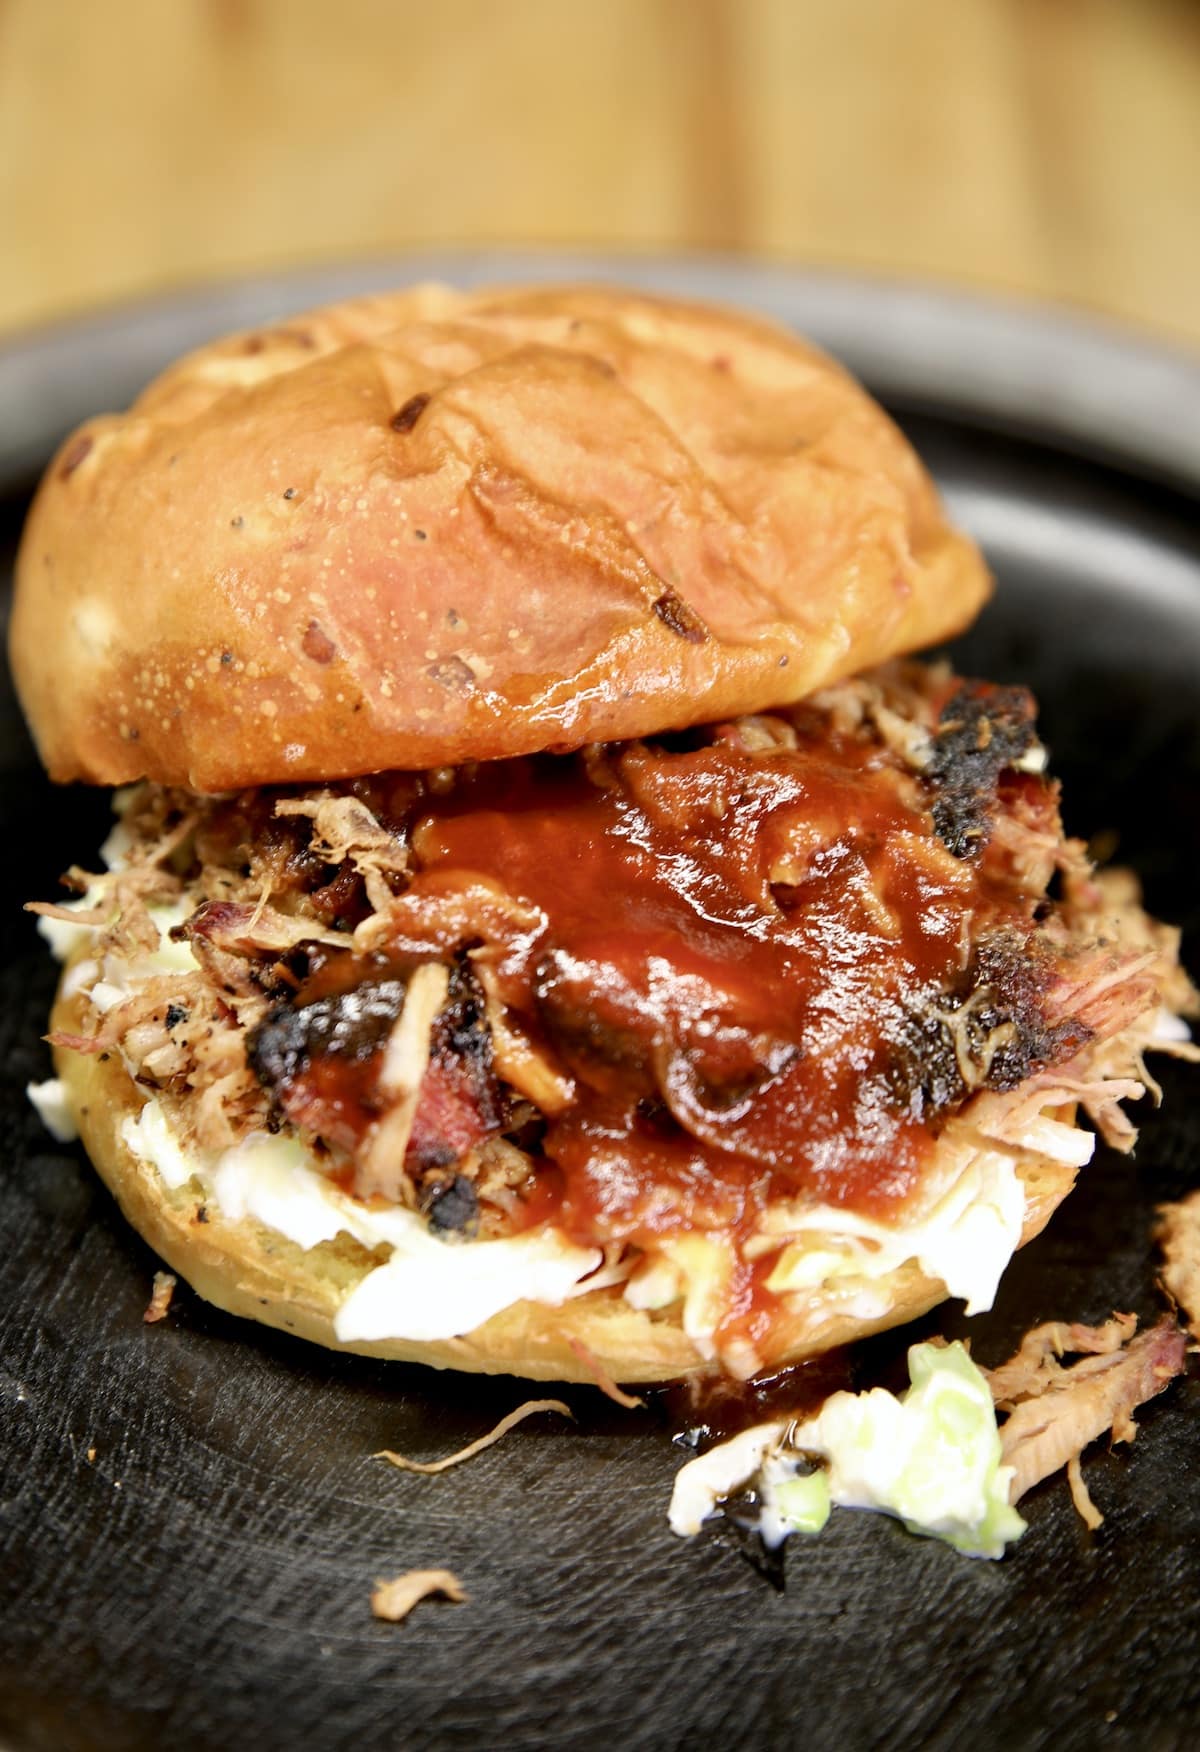 Pulled pork sandwich with coleslaw and bbq sauce.